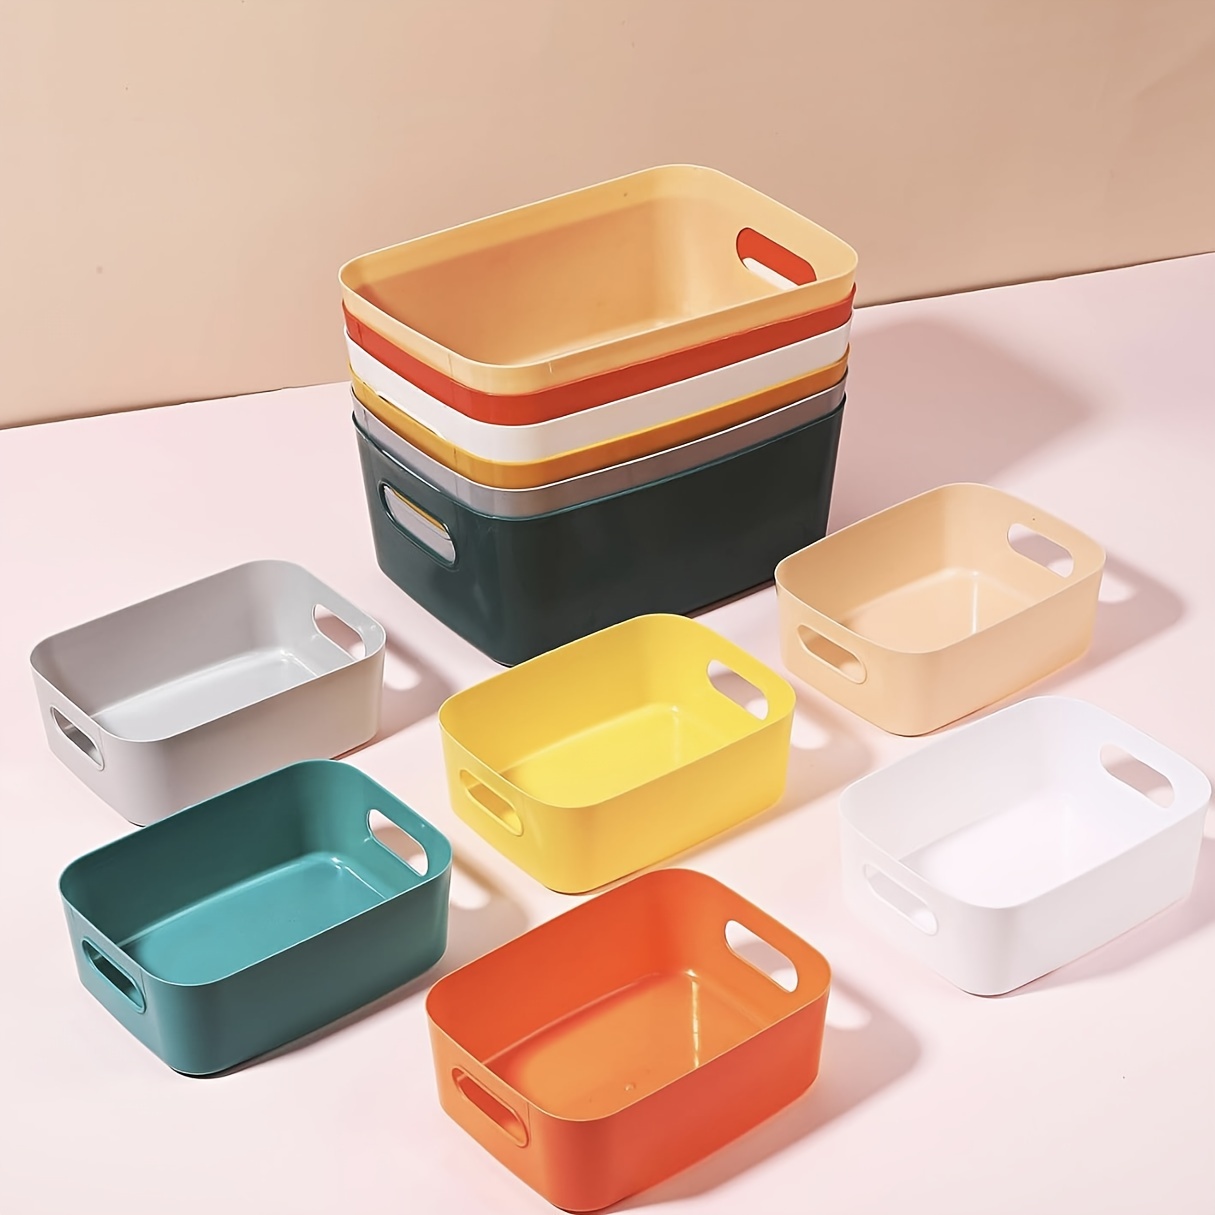 1-Pack Plastic Storage Bins and Baskets for Efficient Home Classroom  Organization - Small Containers in Multiple Colors for Kitchen, Cupboard box,  and Bathroom Organizer on Shelves and Tubs